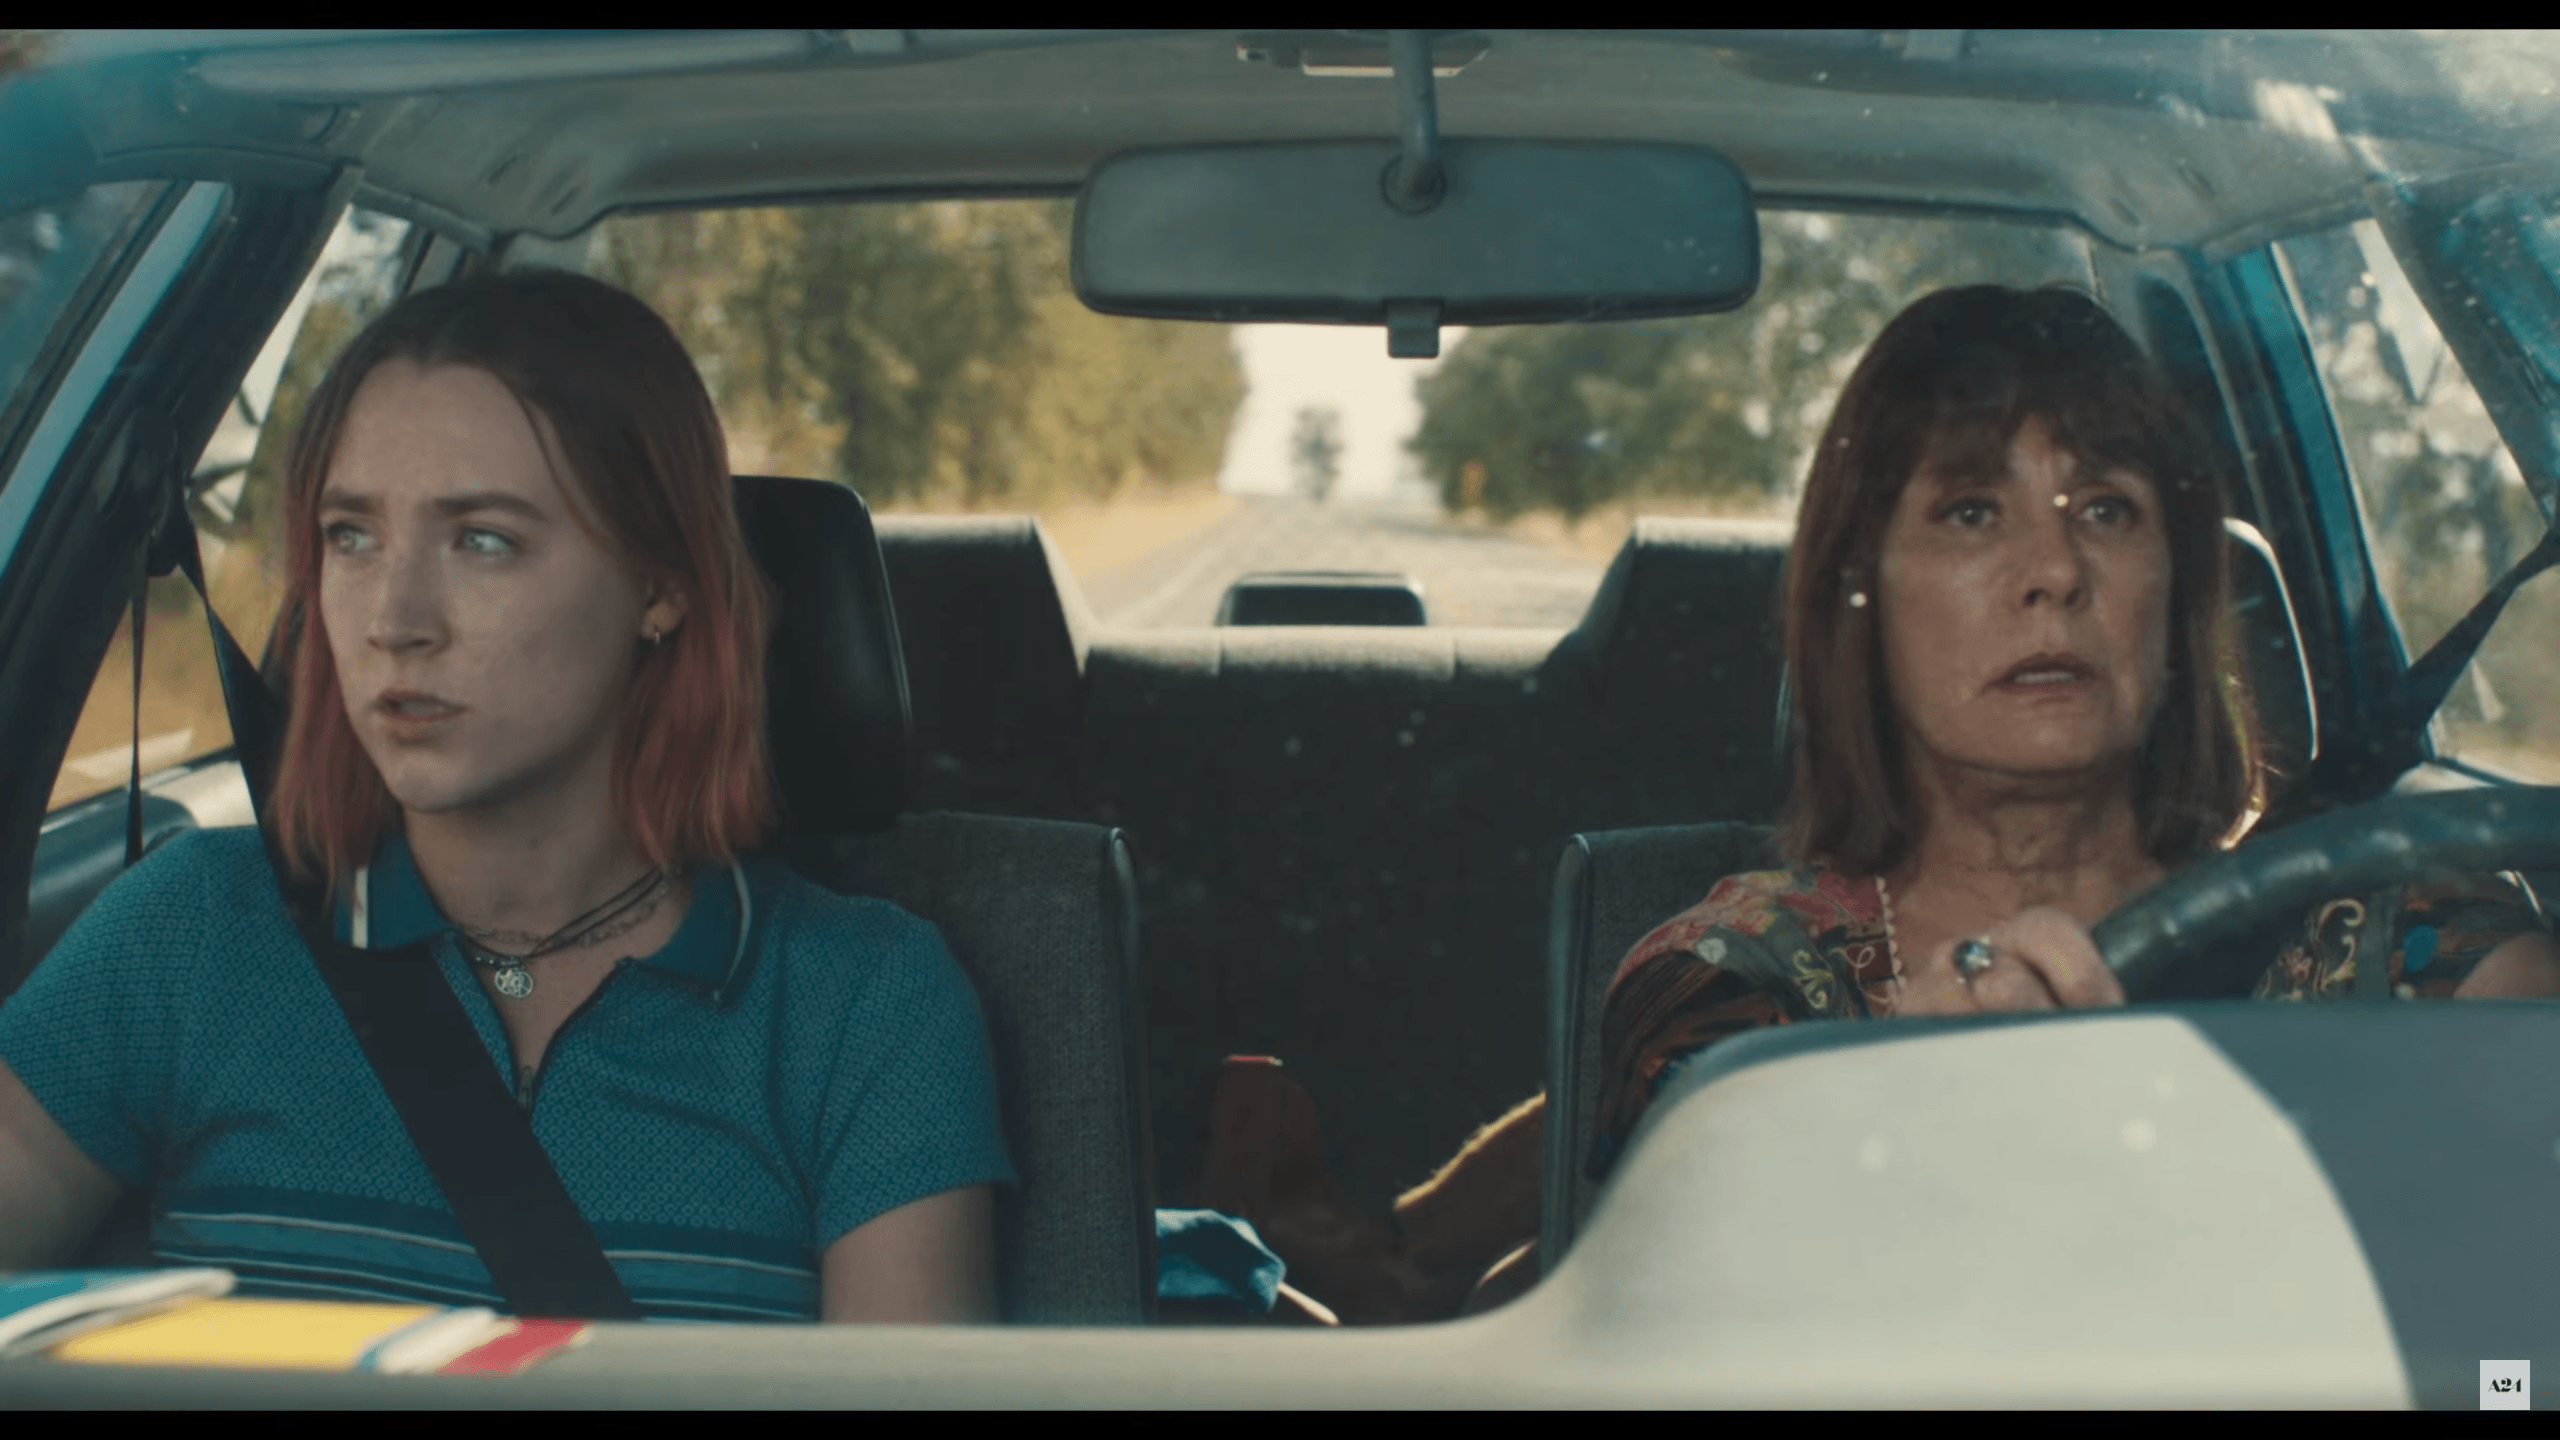 GOLDEN GLOBES 2018: Could Lady Bird's Laurie Metcalf Follow Up Her